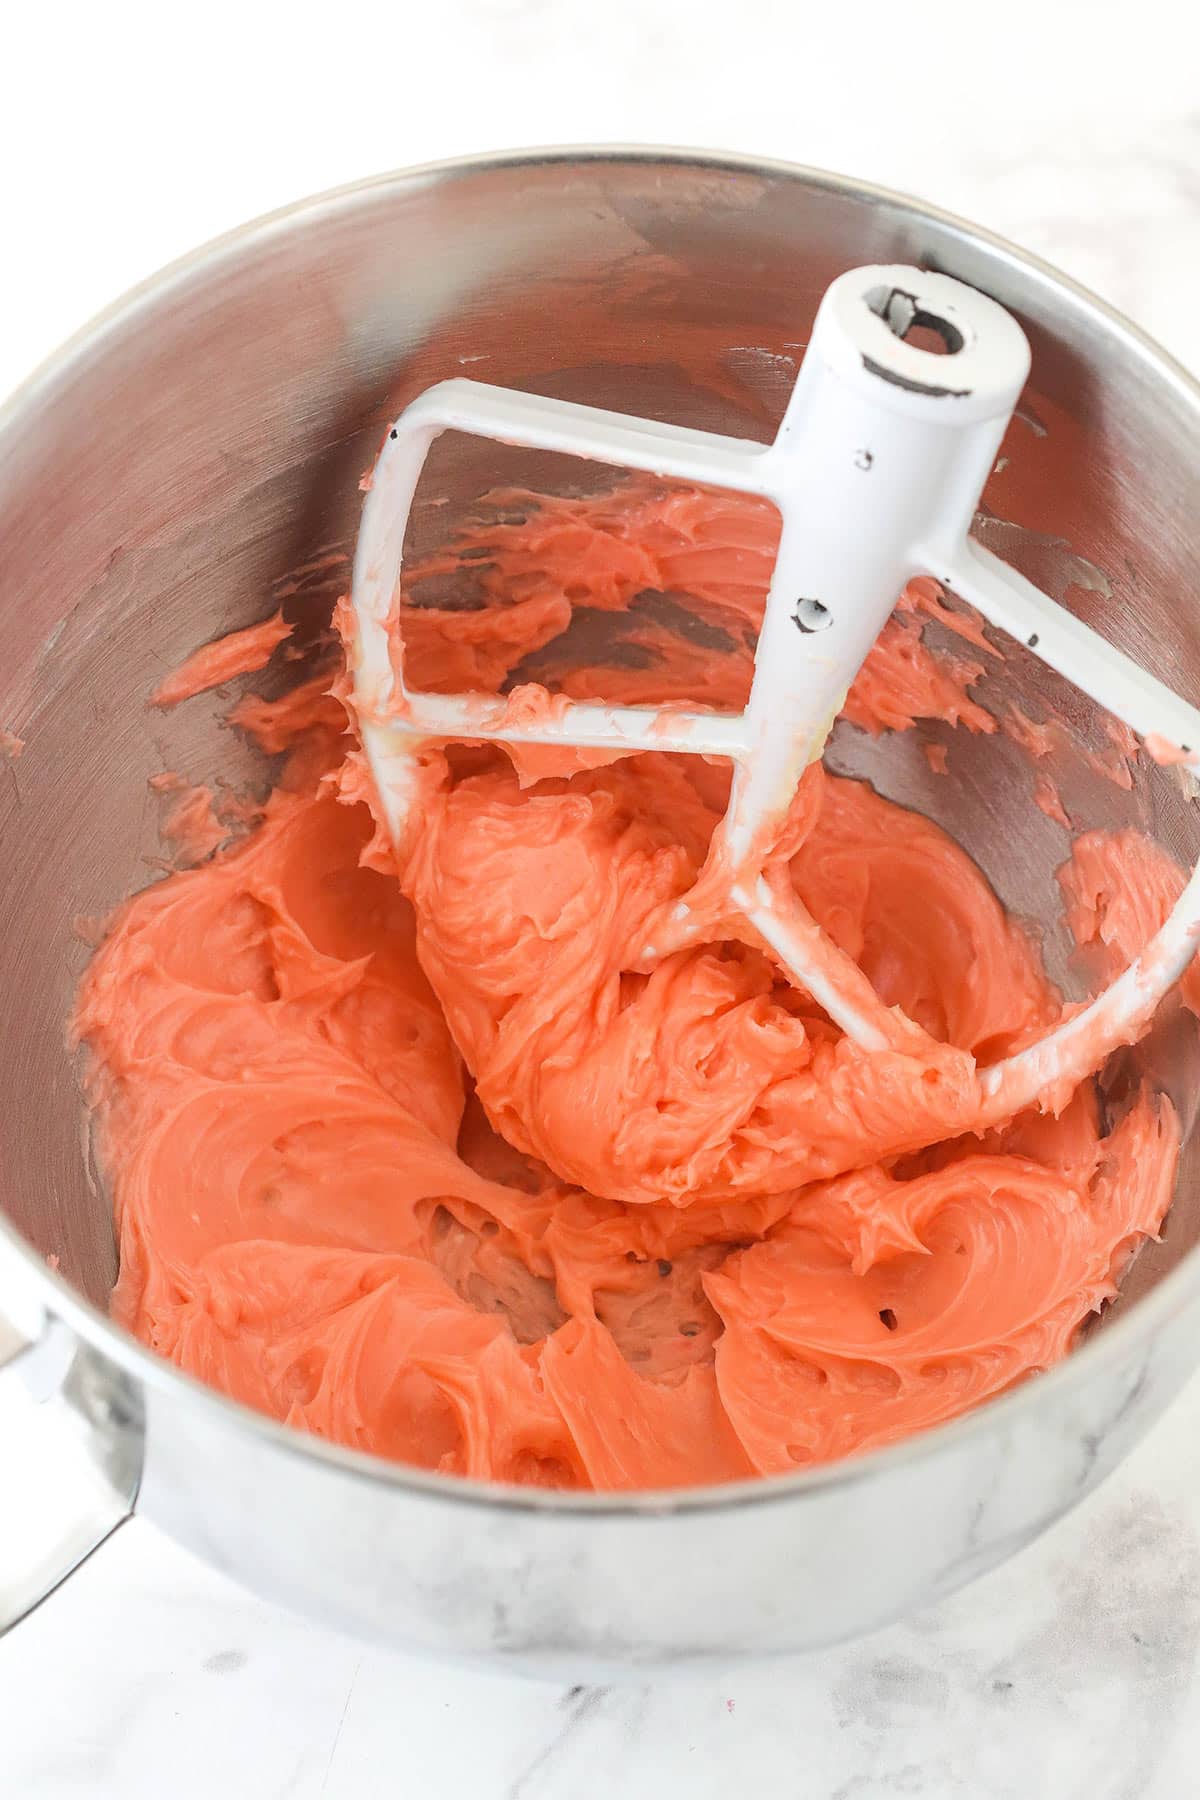 Adding the red food coloring to the creamed butter and sugar.